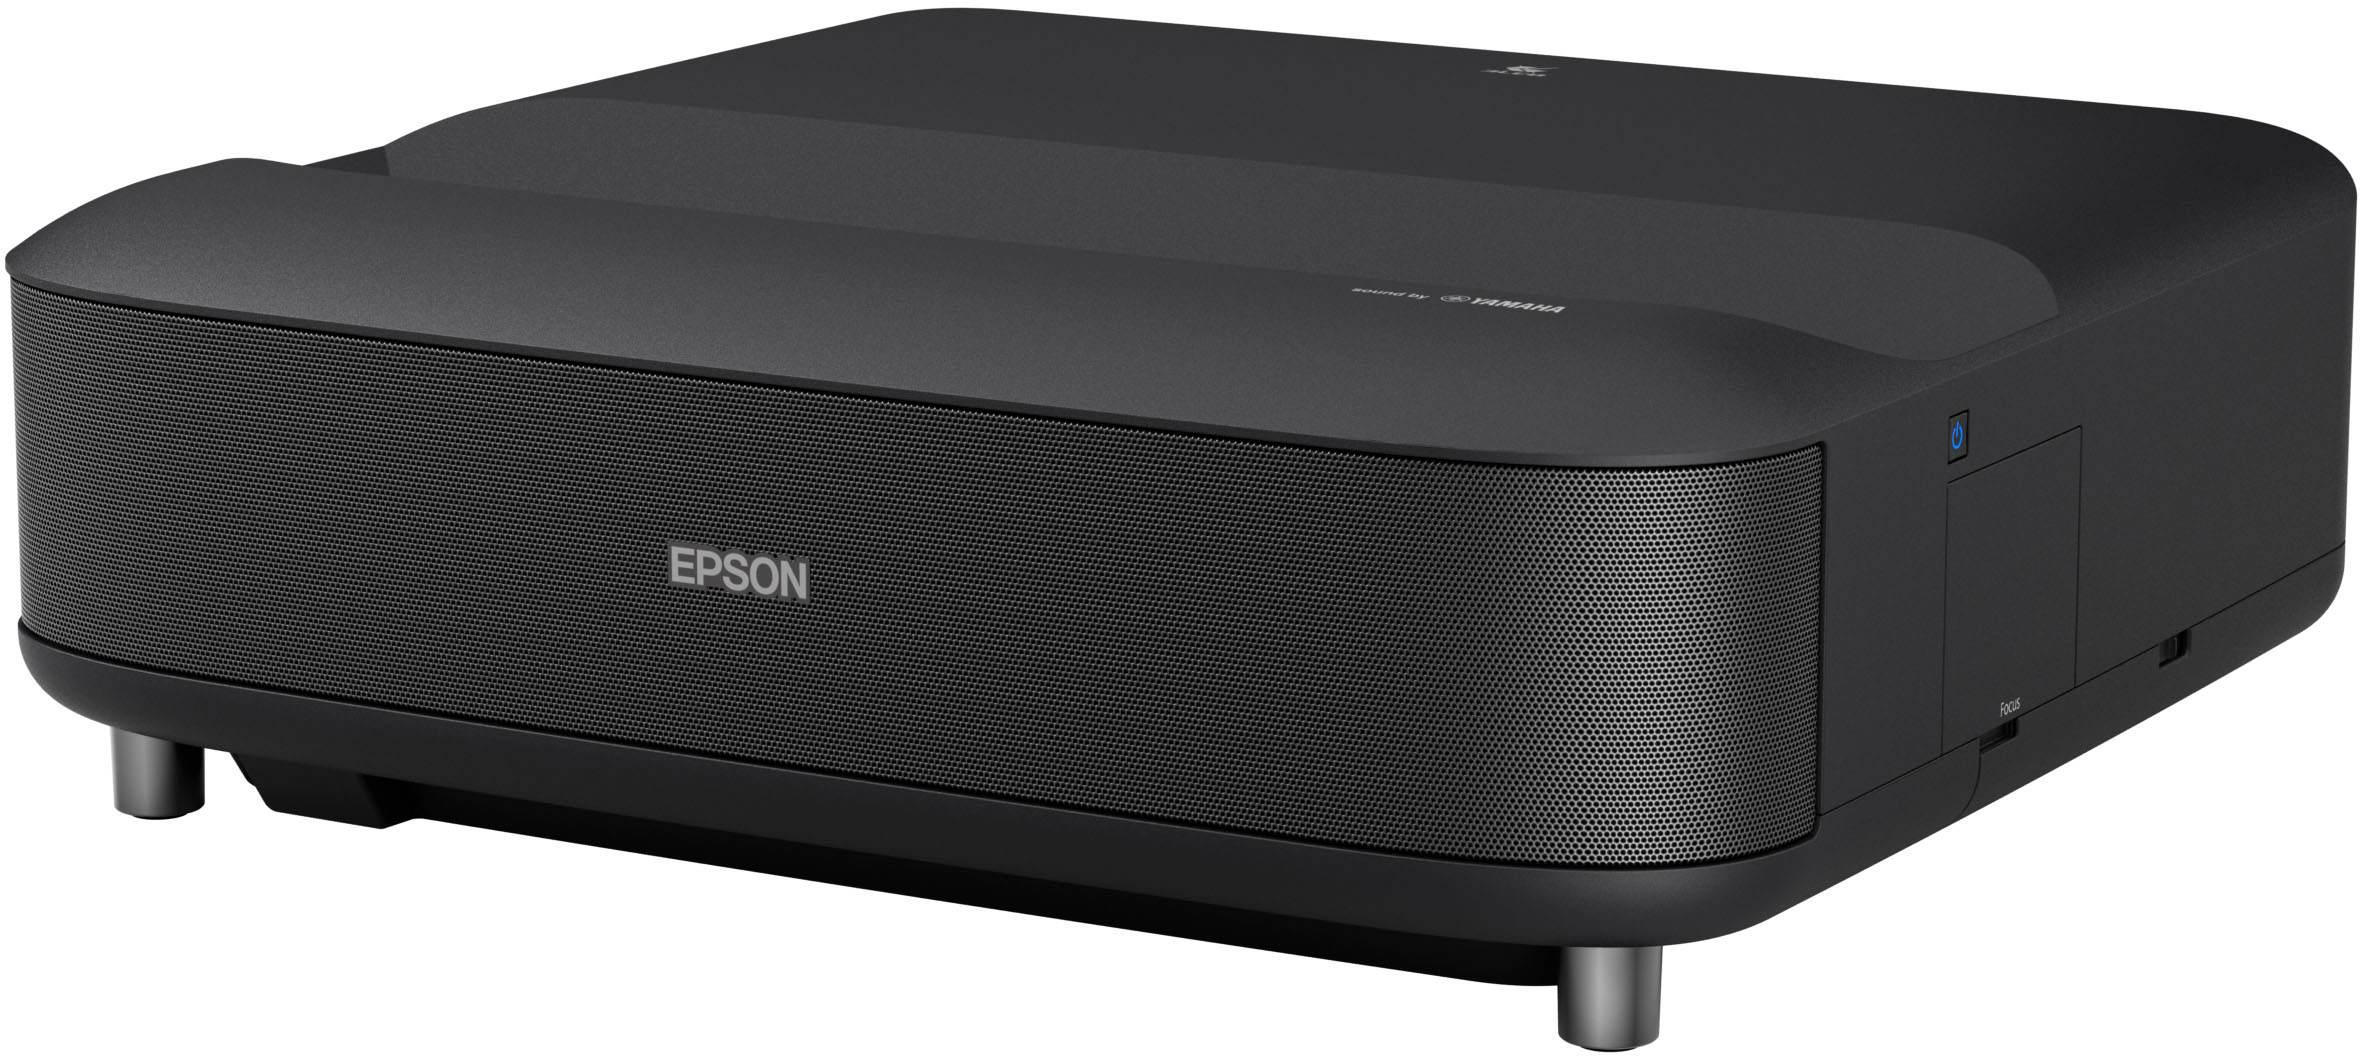 Left View: Epson - LS650 4K PRO-UHD Ultra Short Throw 3-Chip 3LCD Laser Projector, 3600 Lumens, 60”-120", Setting Assistant App, Android TV - Black